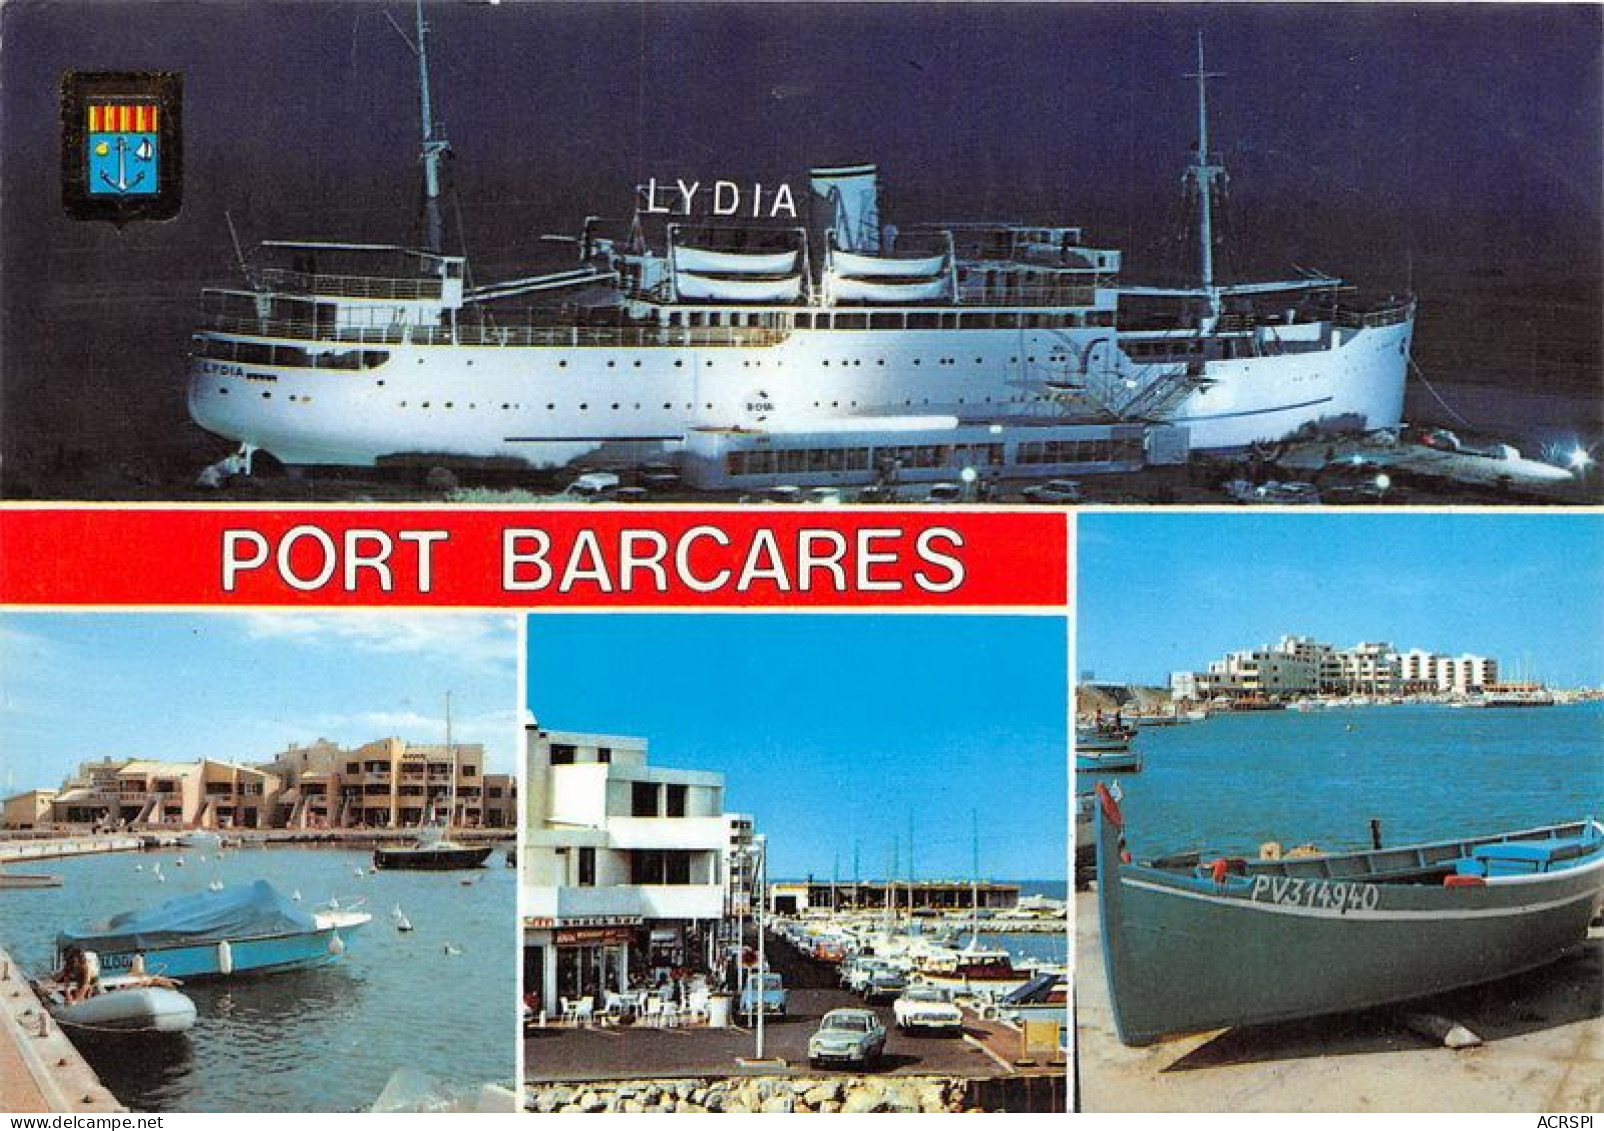 PORT BARCARES Le Lydia Divers Aspects 14(scan Recto-verso) MA1938 - Port Barcares